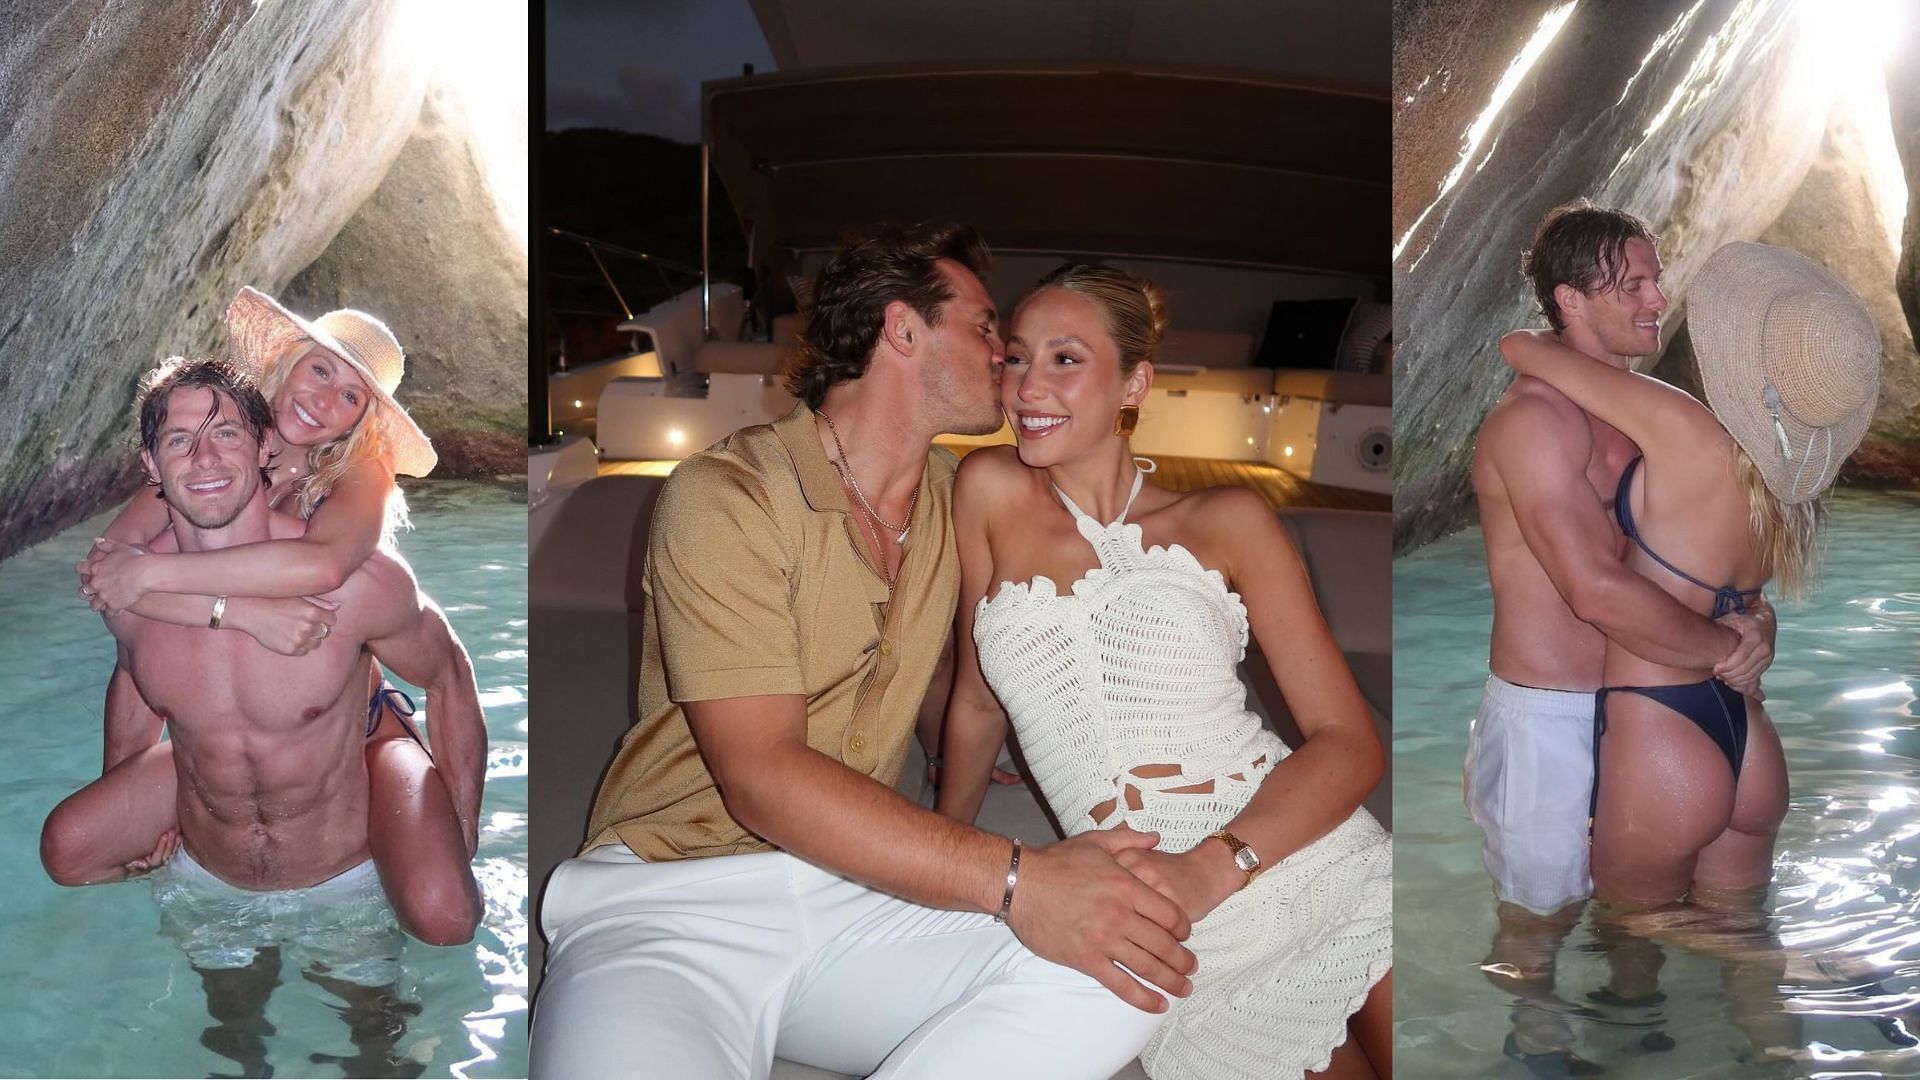 Braxton Berrios and Alix Earle had a romantic time in the Caribbean